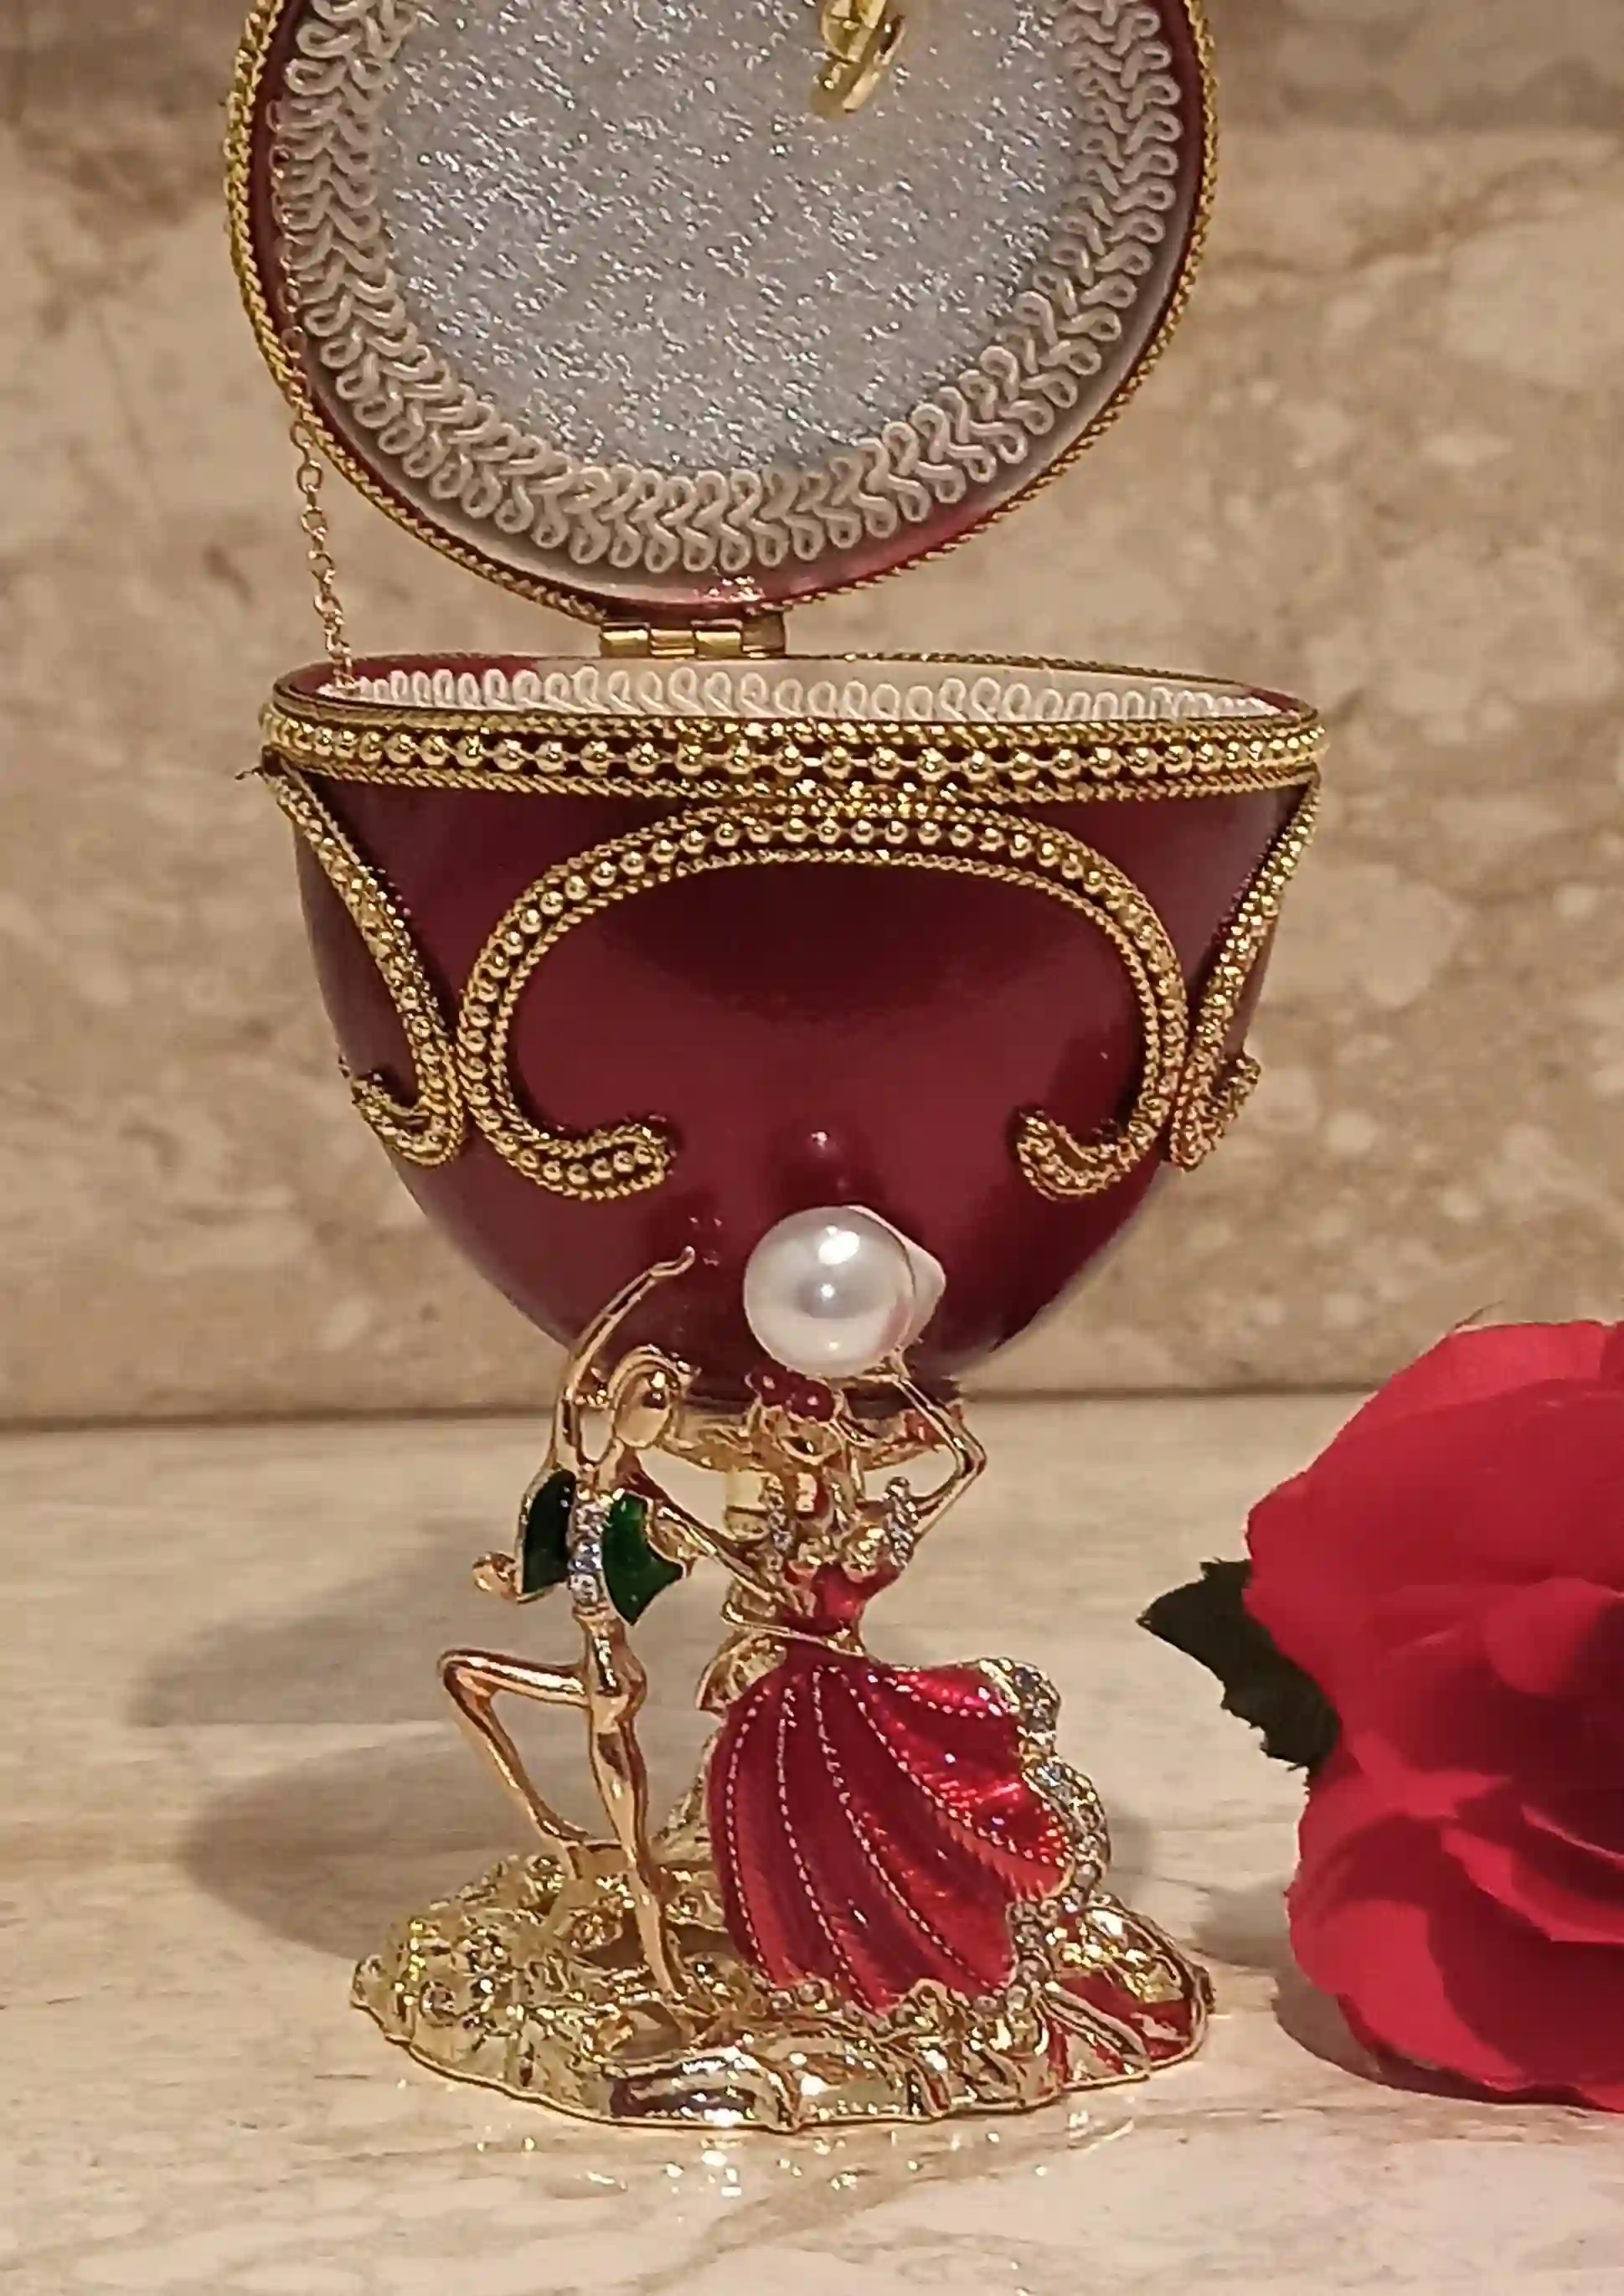 FABERGE Egg Music Box,Unique mom gift,Couples gift,Engagement gift for fiance,Housewarming gift,Unique gift for wife,1st wedding gift idea 